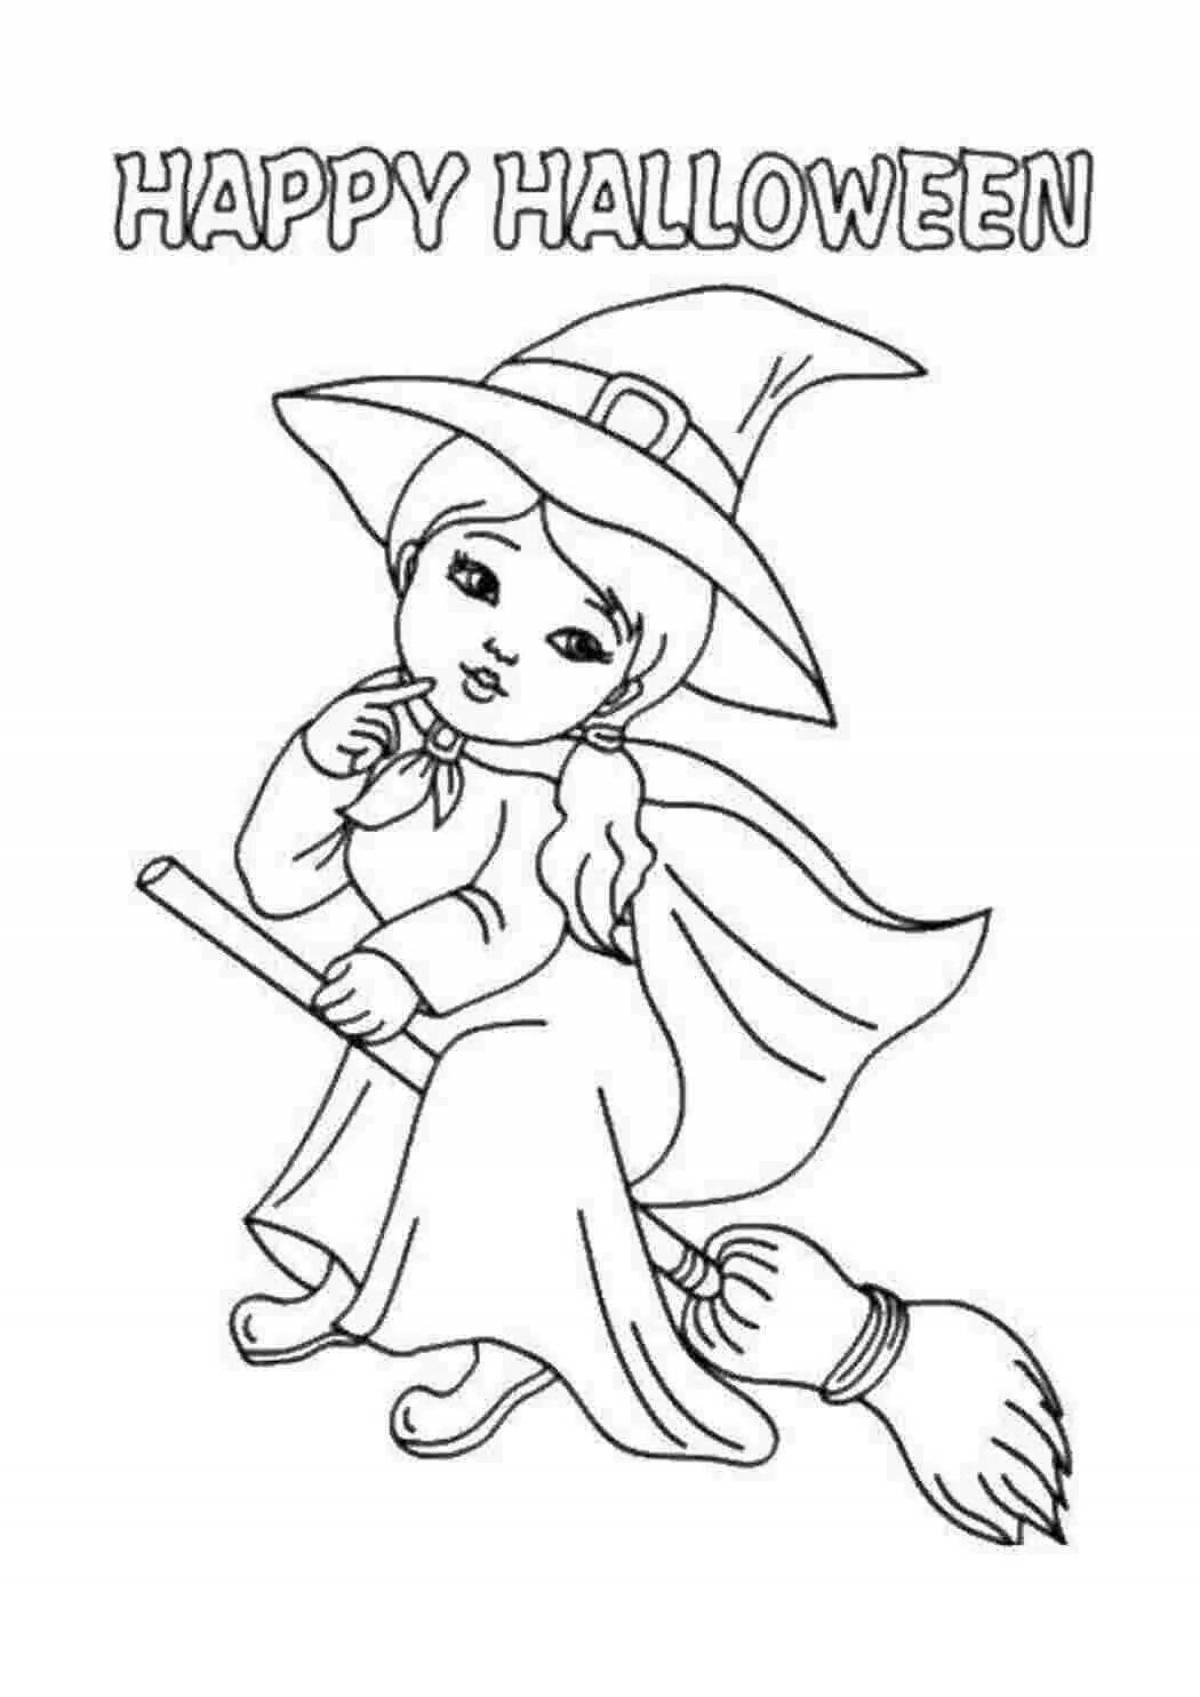 Witching hour coloring page for real witches